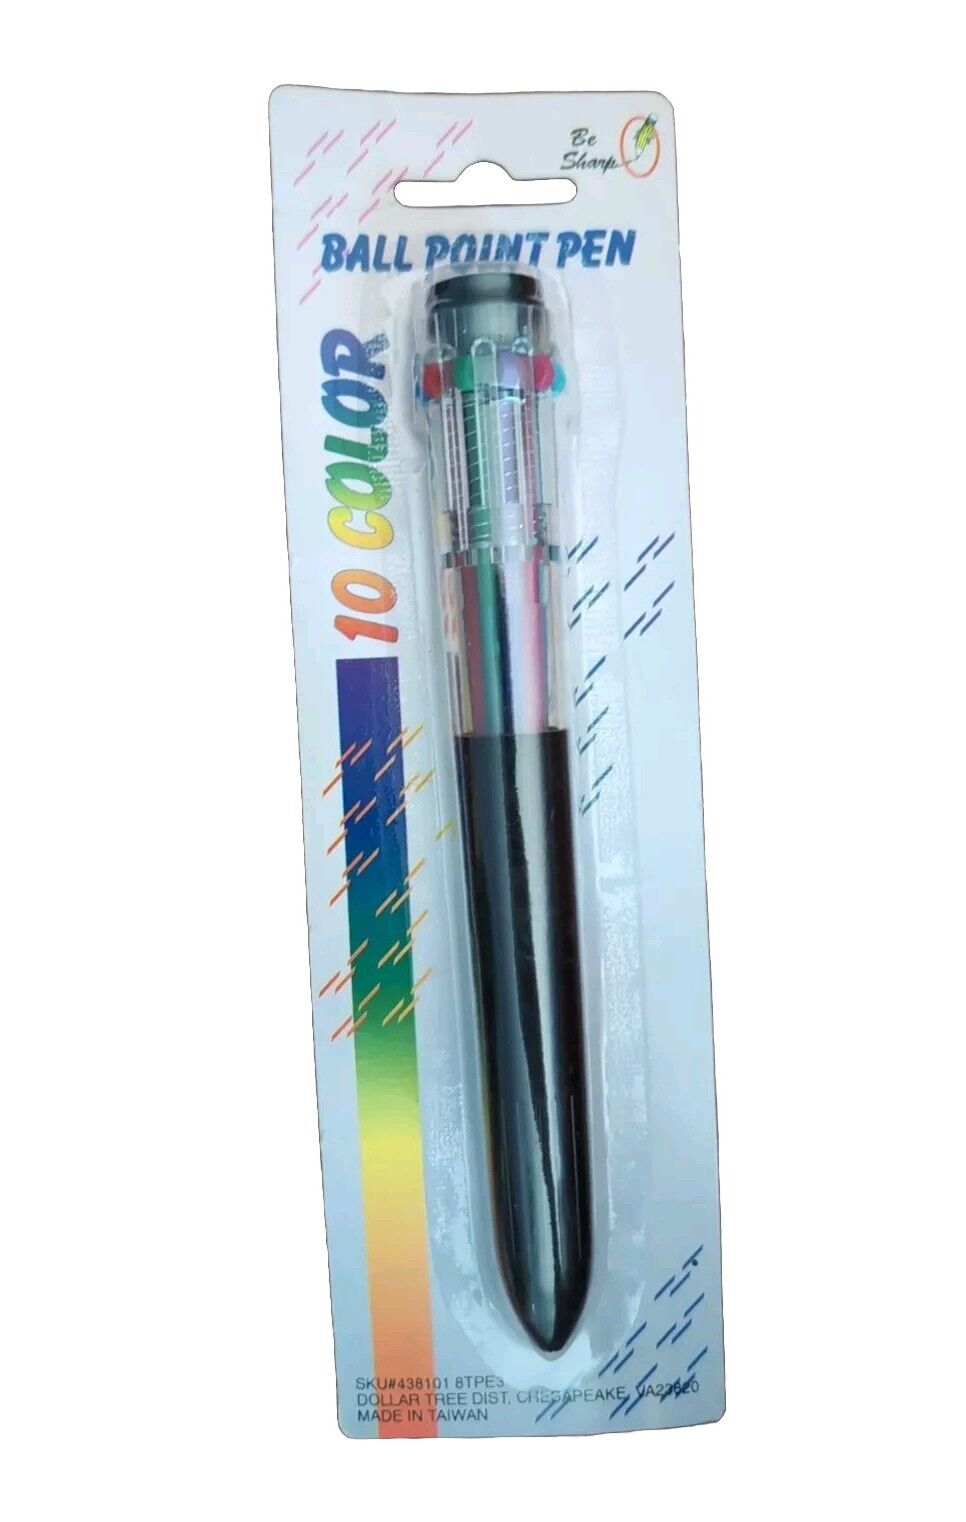 Vintage Black Colored Plastic Retractable Ball Point Pen 10-in-1 Dollar Tree NOS